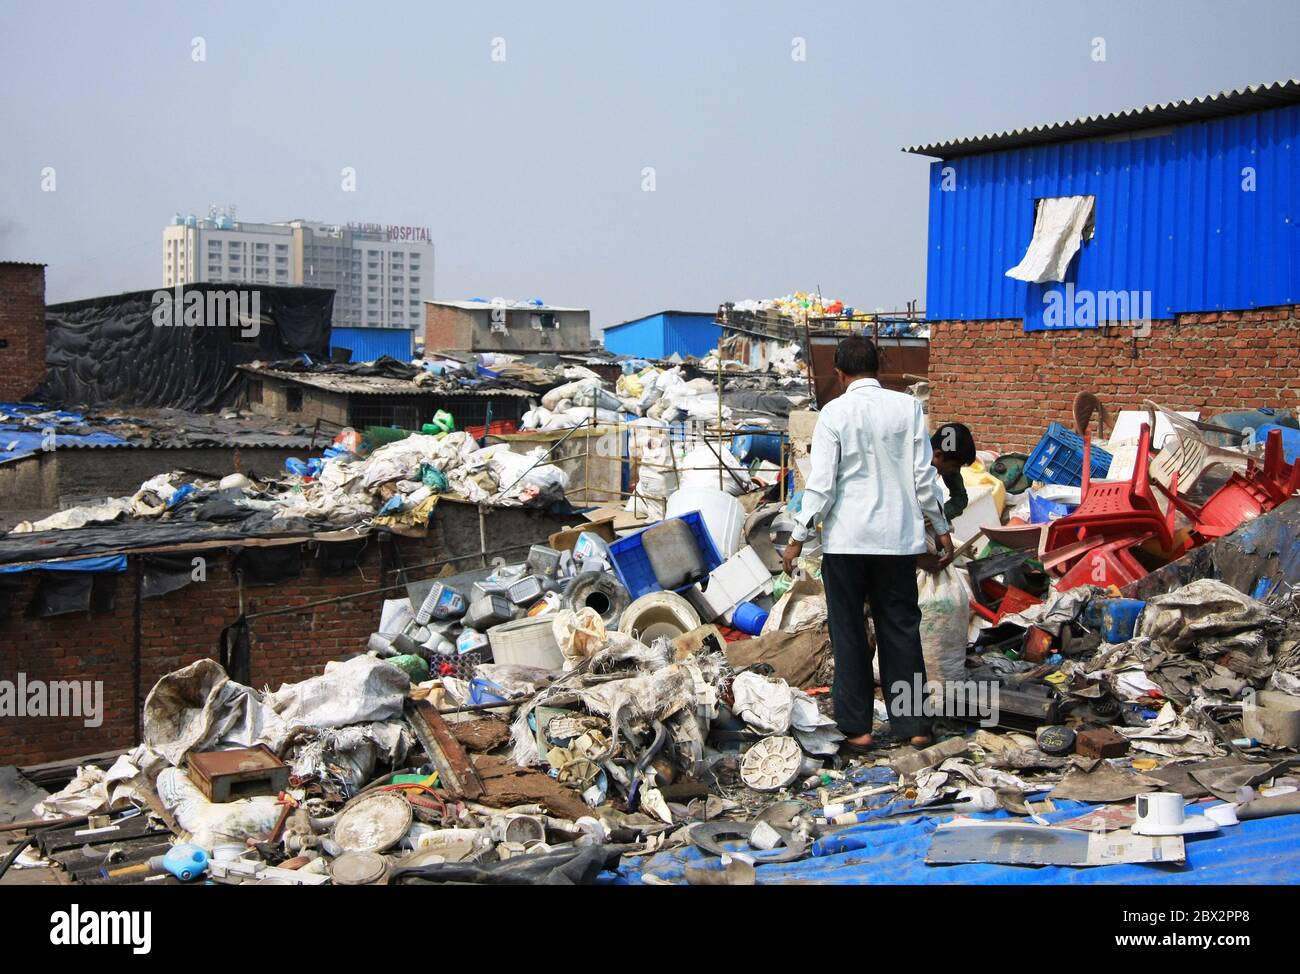 Mumbai, India - Dharavi slum waste rooftops with plastic waste and rubbish on hand-built slum living accommodation, in the middle of the city Stock Photo